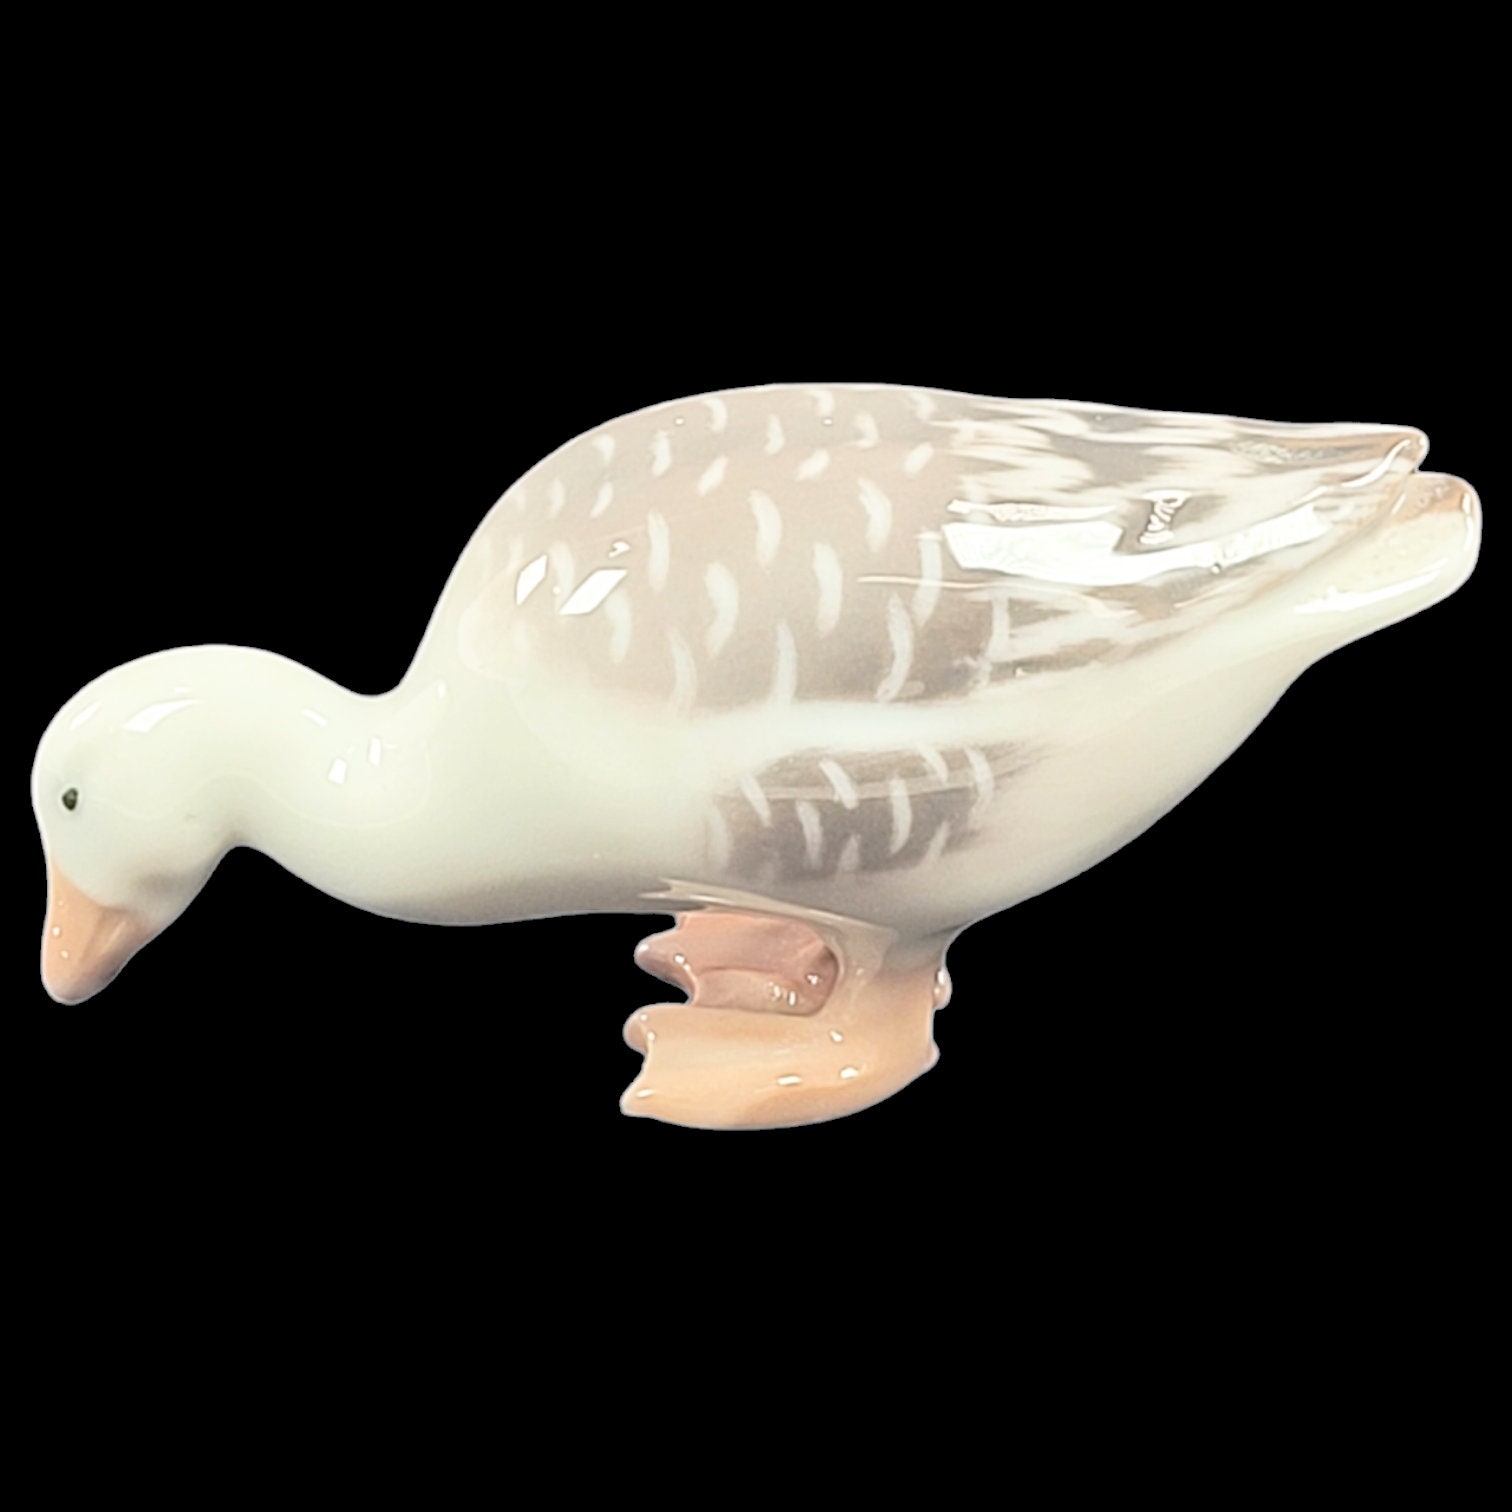 GREY GOOSE Unique Feathered Goose Statue Animal Figurine for Home Decoration 